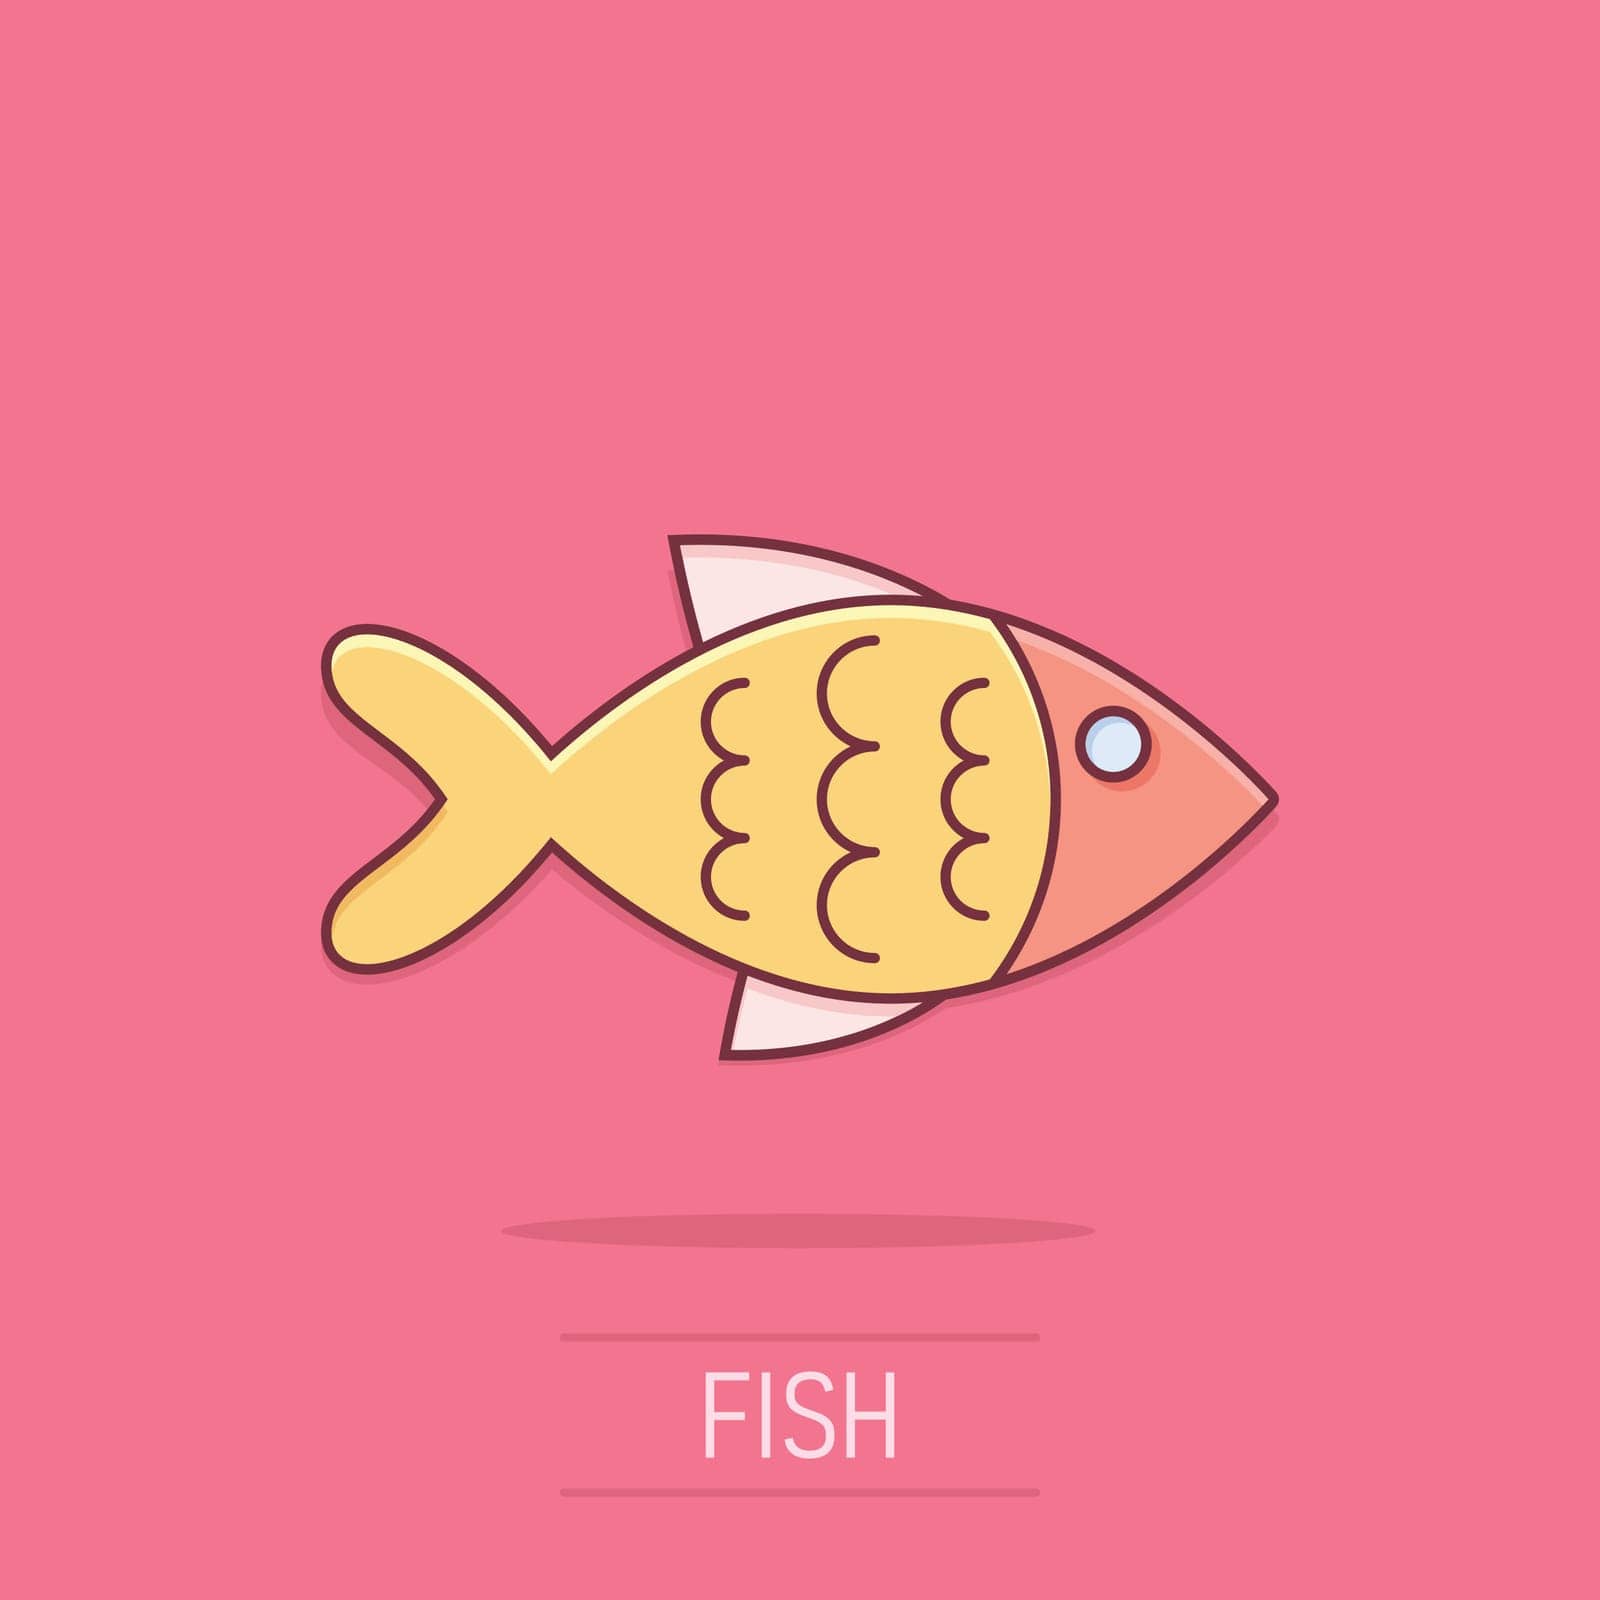 Fish sign icon in comic style. Goldfish vector cartoon illustration on isolated background. Seafood business concept splash effect.